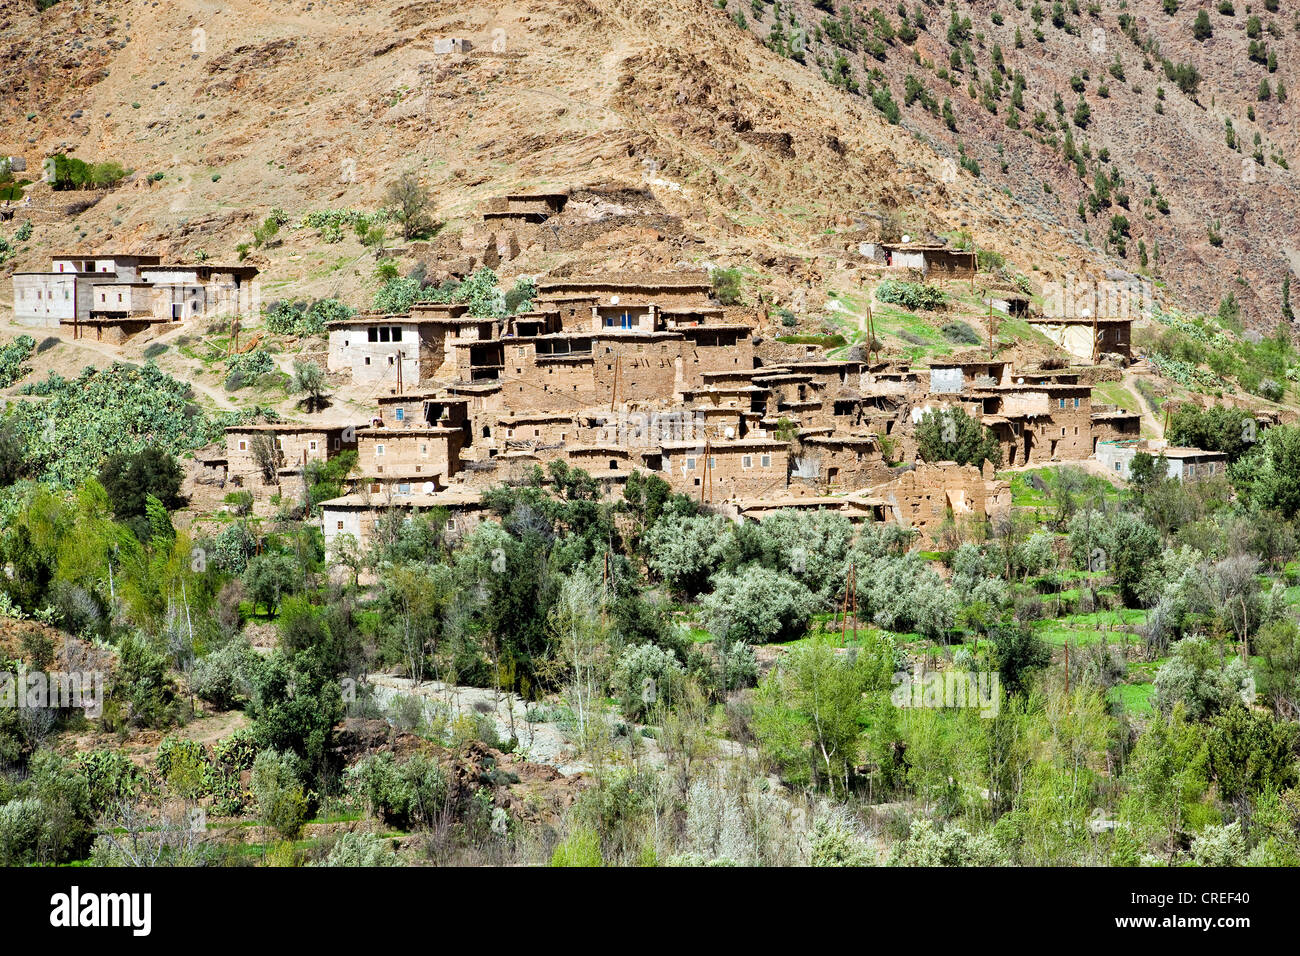 Mountain village with mud-walled houses near the Tizi-n-Test mountain pass, Tizi-n-Test mountain pass road in the High Atlas Stock Photo